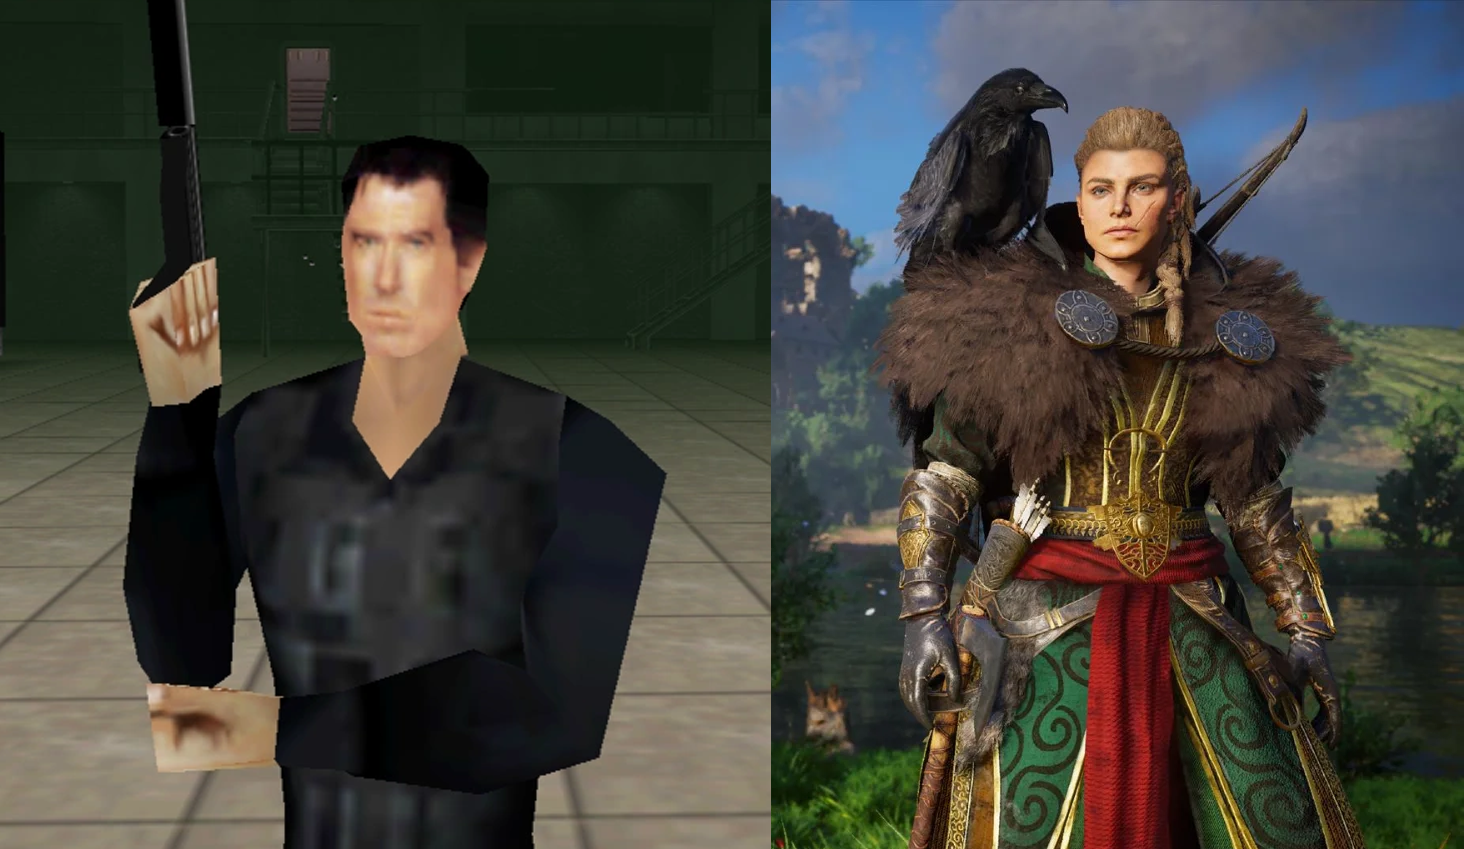 In-game character model comparison between Goldeneye (1997) and Assassin's Creed Valhalla (2020)